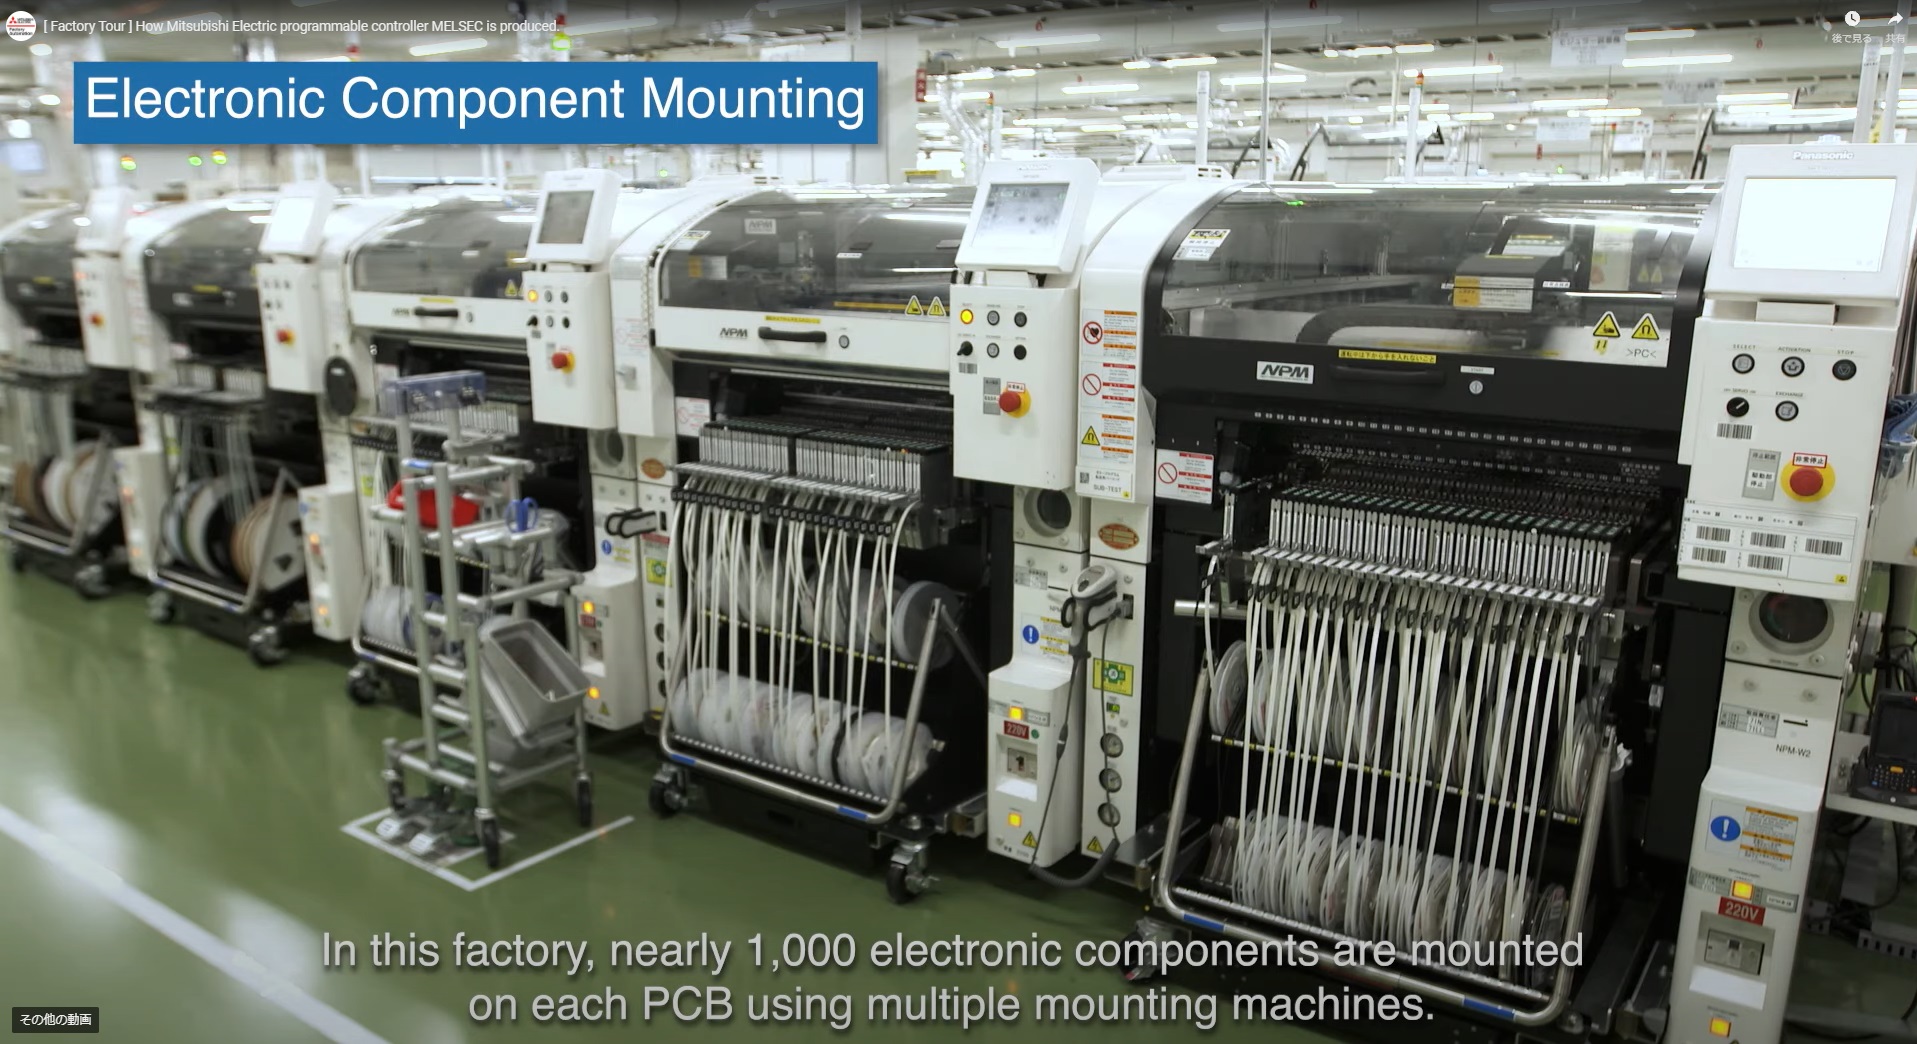 The first tour will show how Mitsubishi Electric’s factory automation (FA) controller products are made at its Nagoya Works. [Source: Mitsubishi Electric Corporation, Japan]